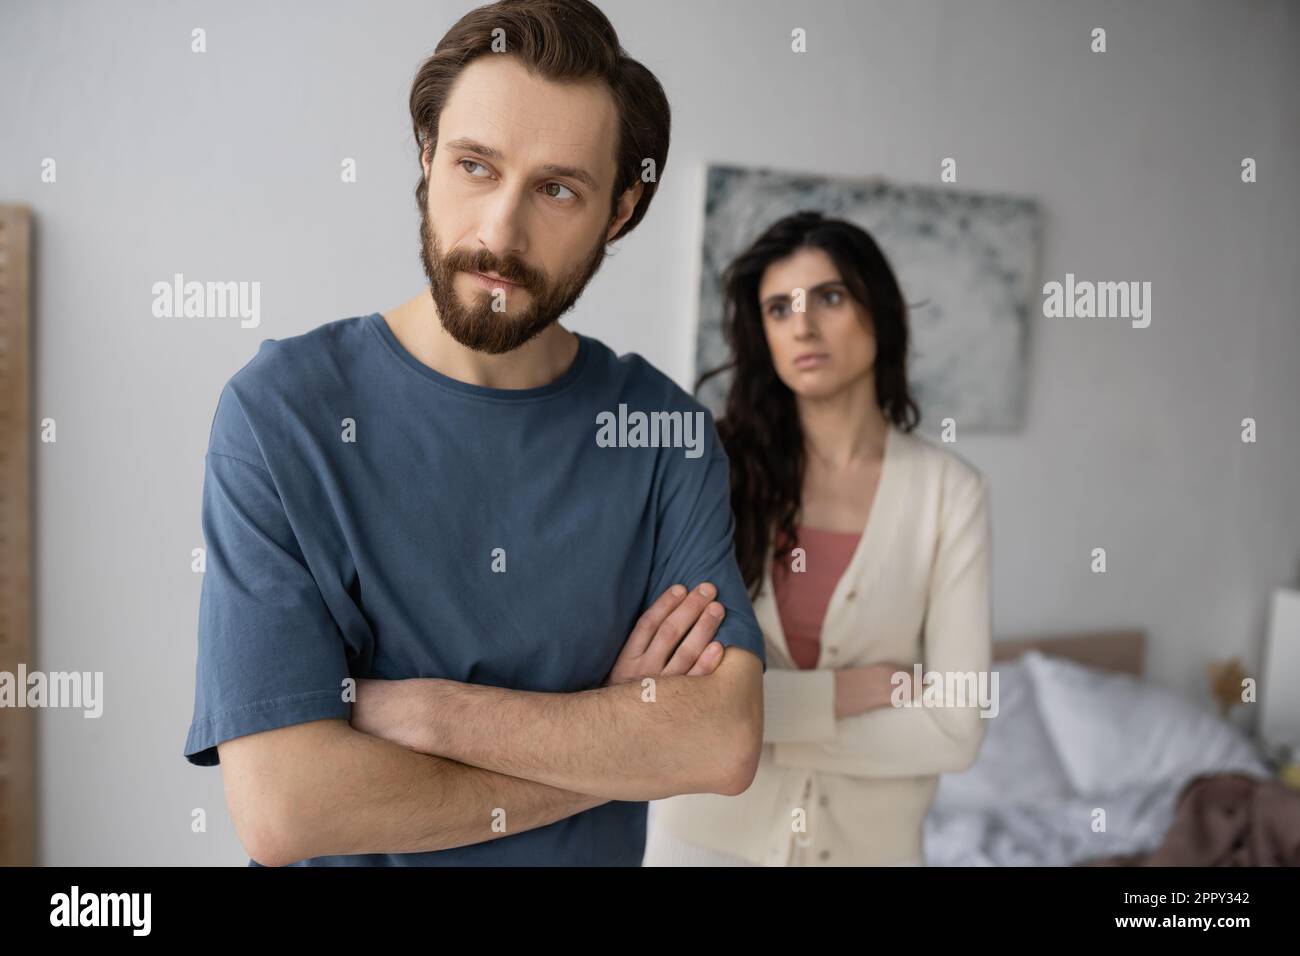 Offended man crossing arms near blurred girlfriend in bedroom,stock image Stock Photo